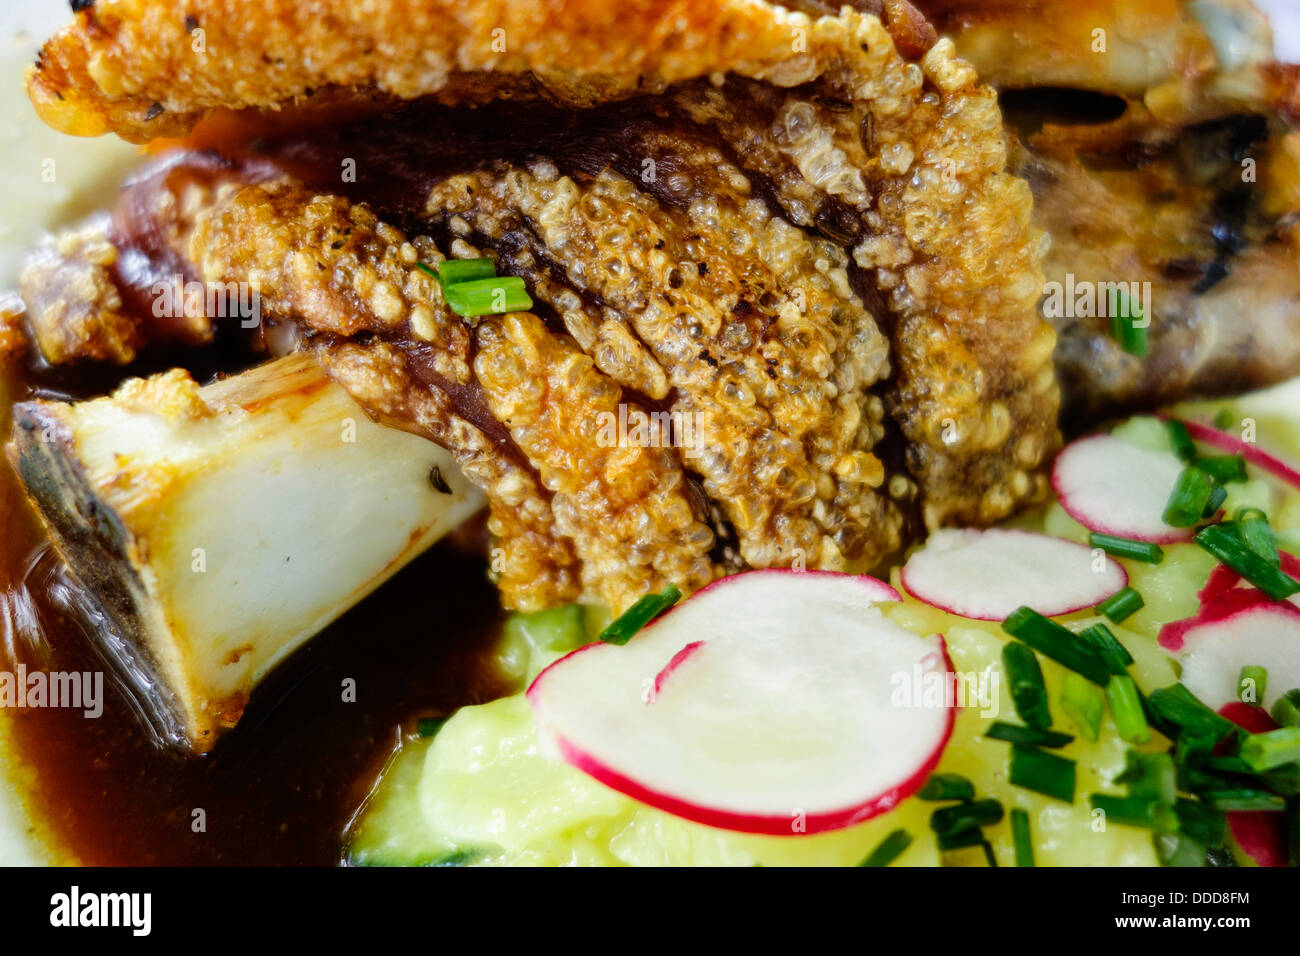 Roast knuckle of pork with crackling Stock Photo